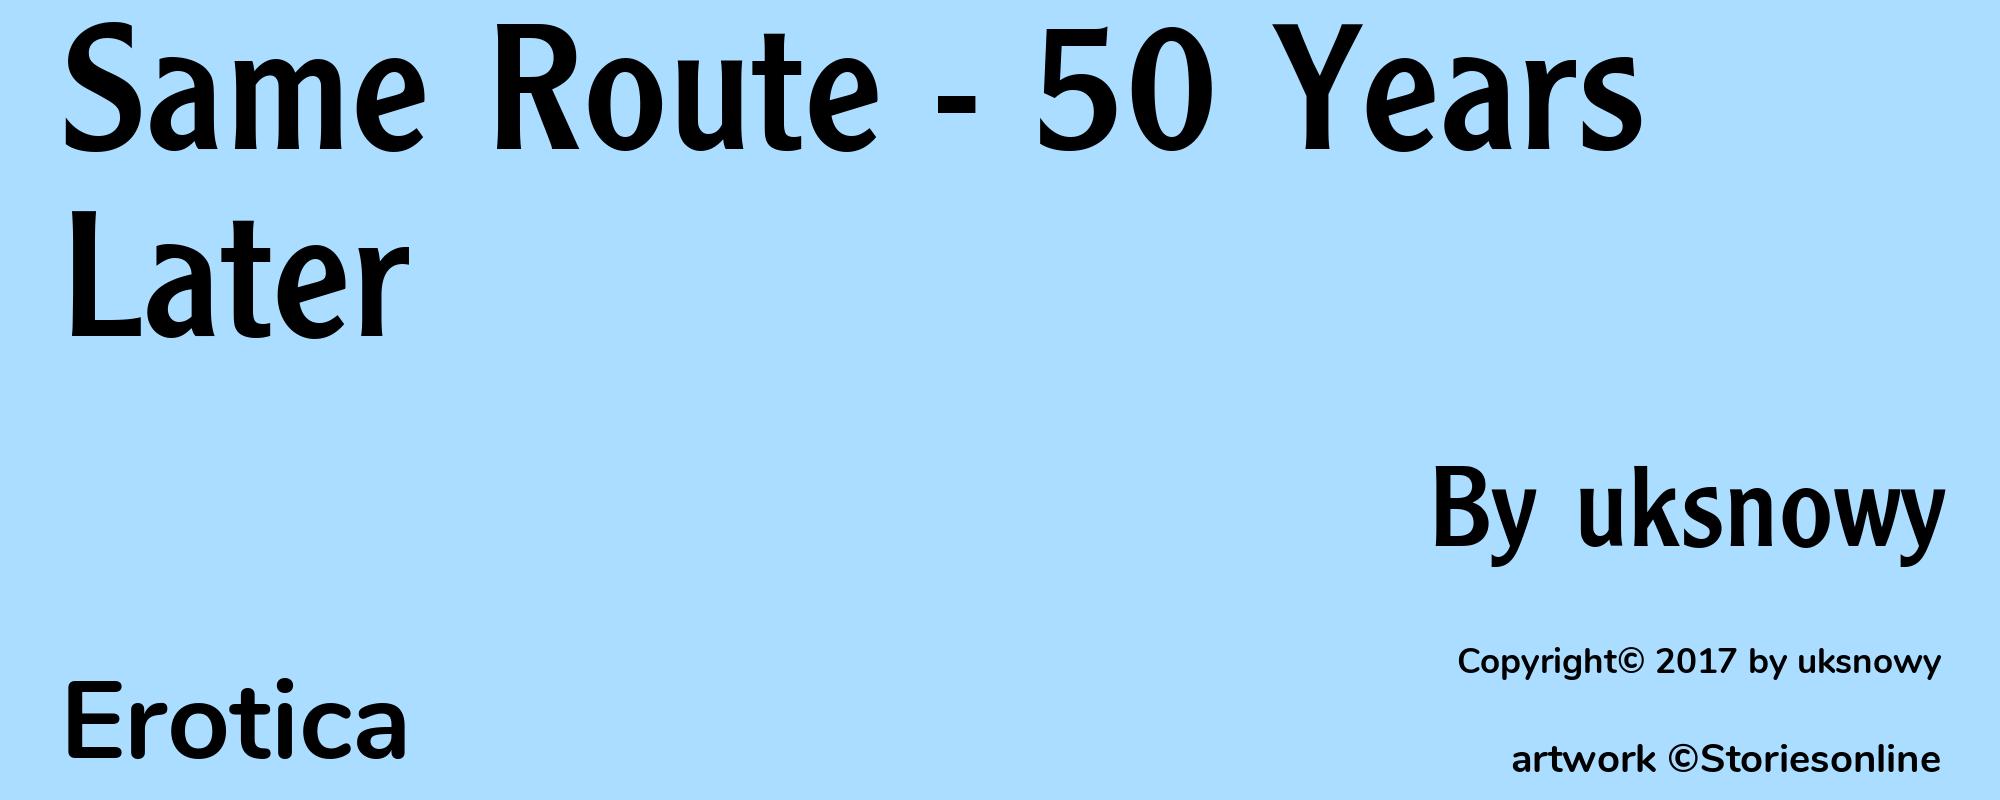 Same Route - 50 Years Later - Cover